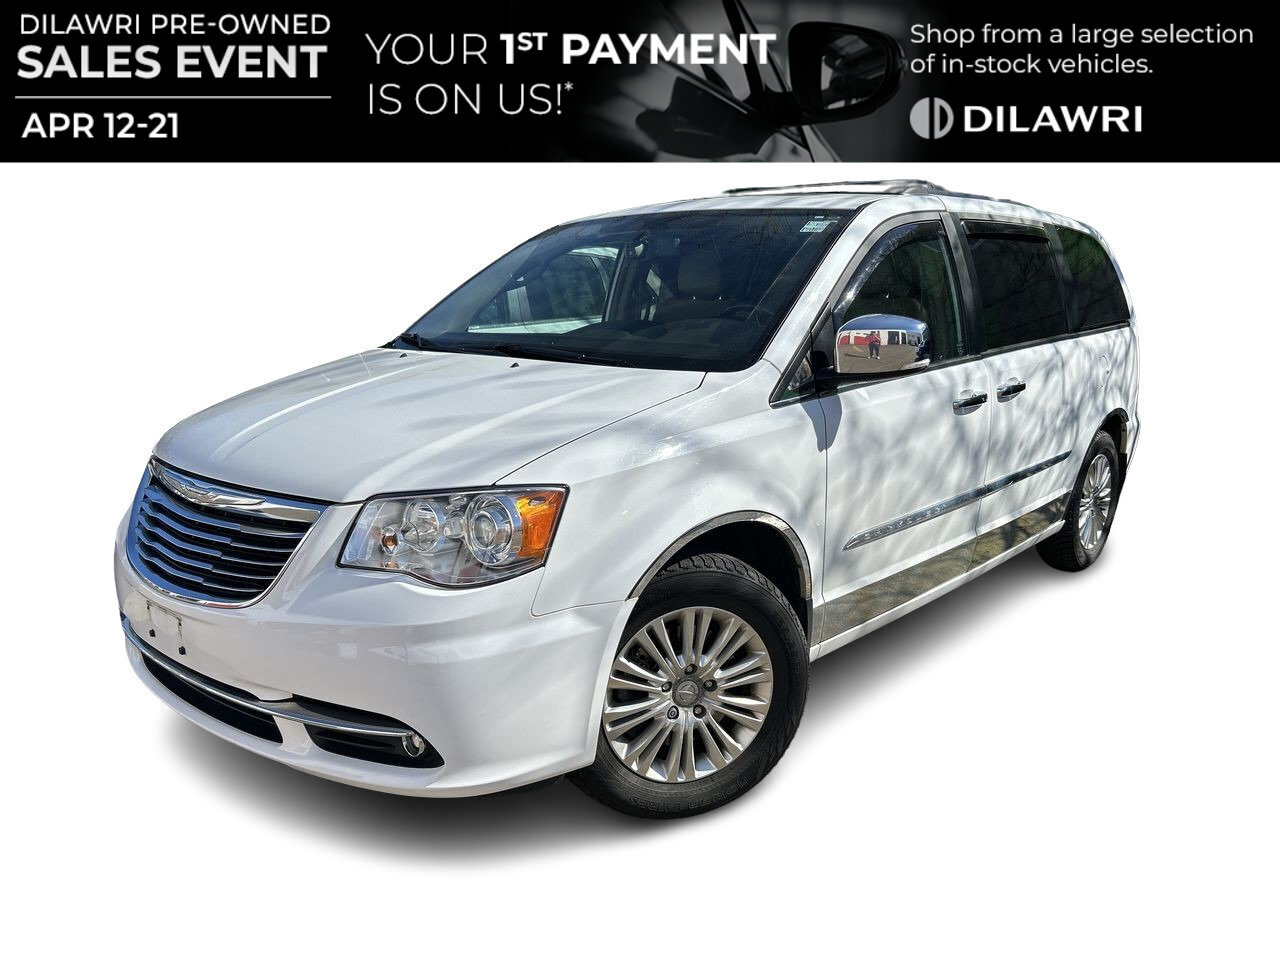 2015 Chrysler Town & Country Limited | Dilawri Pre-Owned Event ON Now! | / | Lo